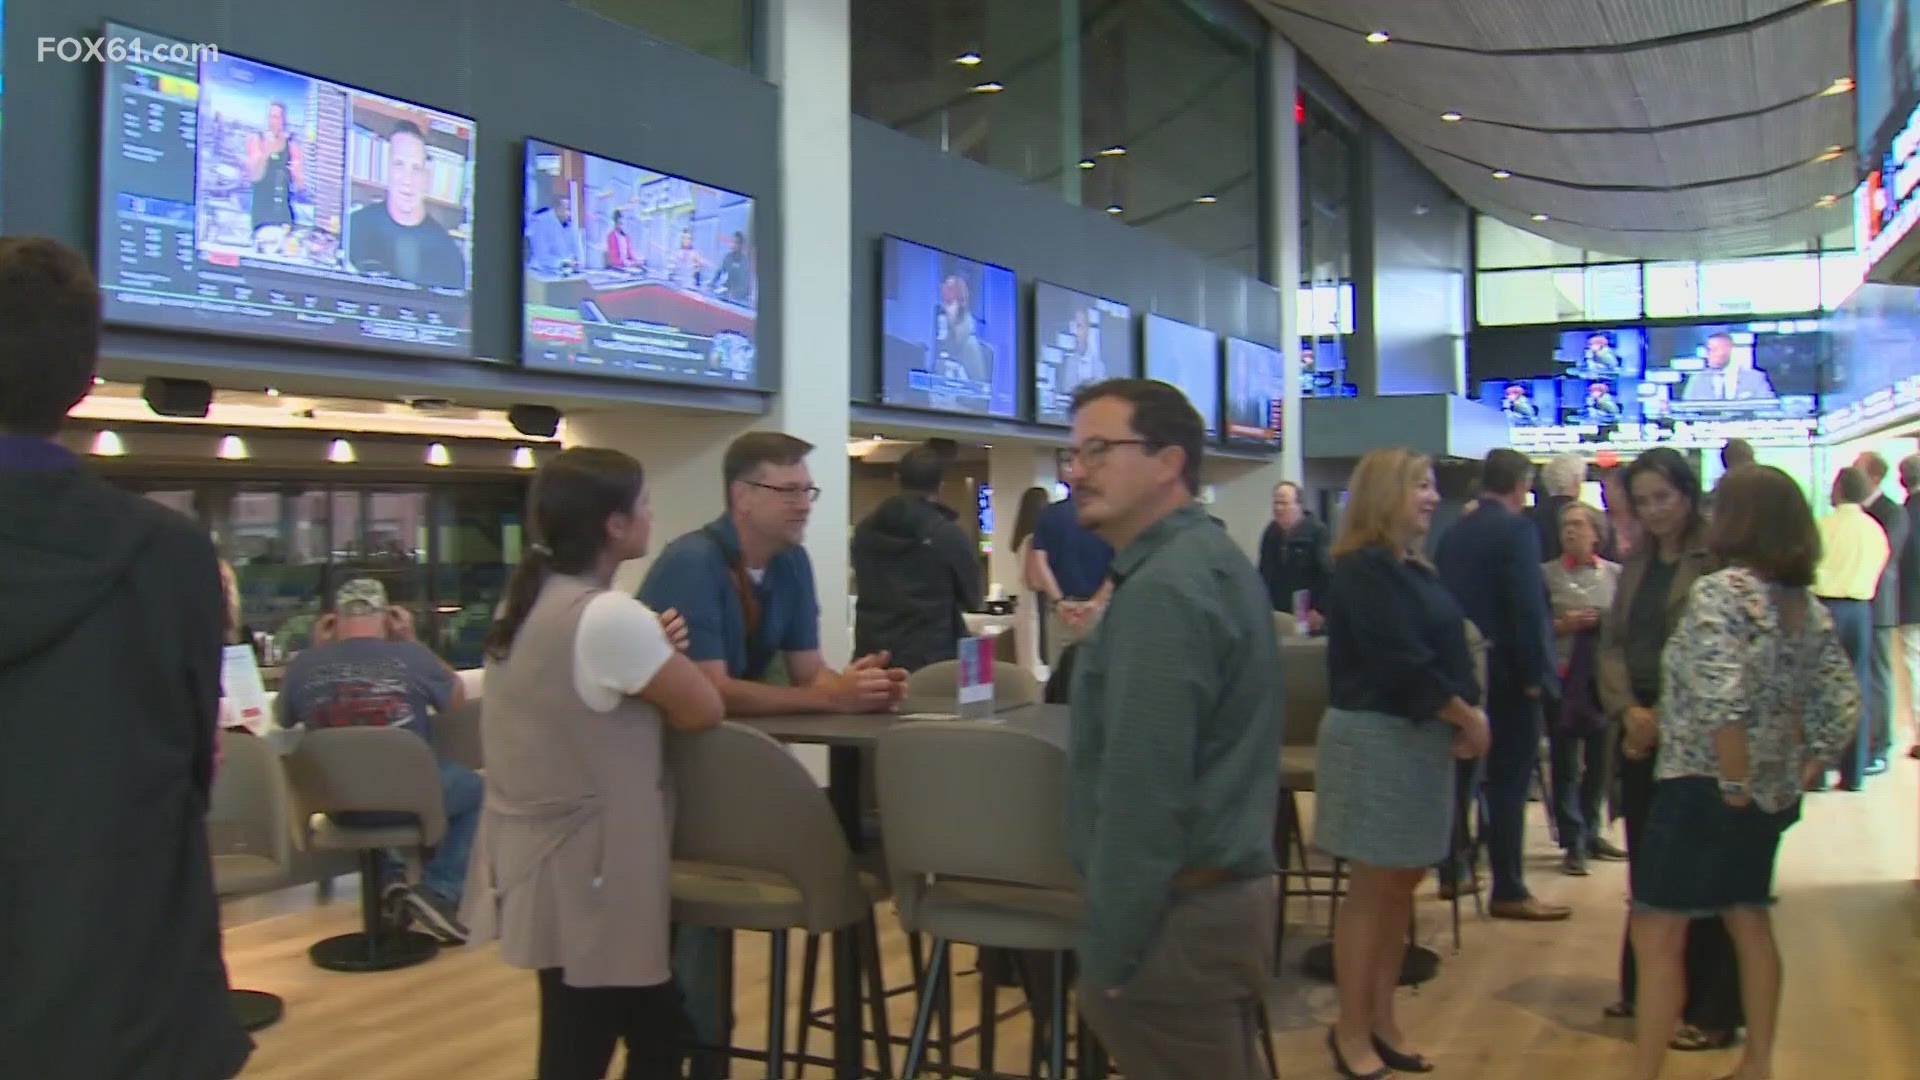 The XL Center Sports Bar and Sportsbook is now officially open.